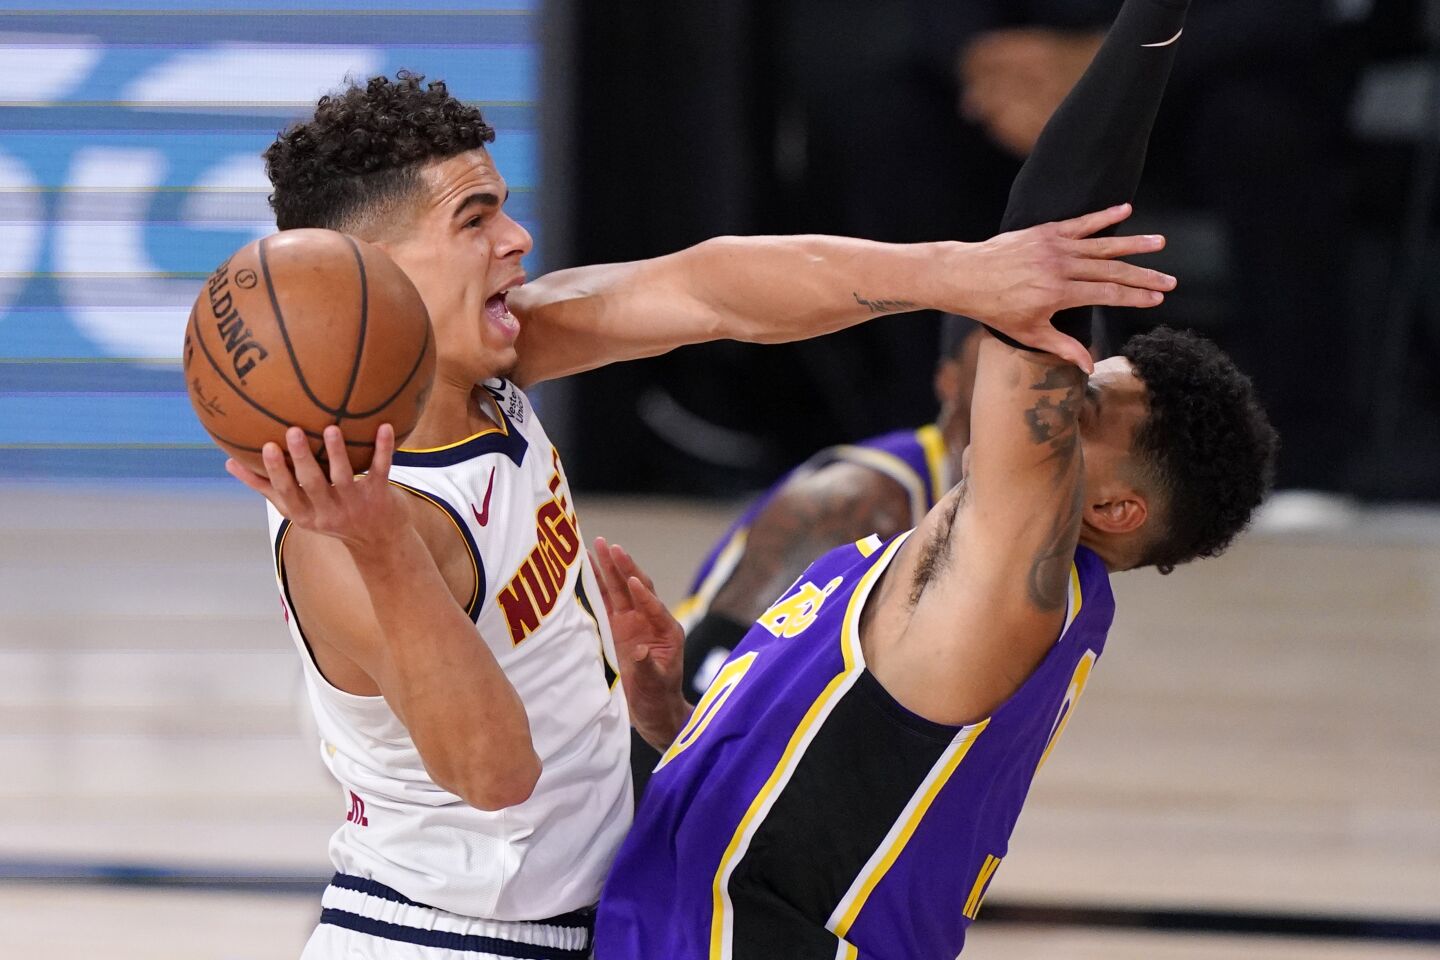 Nuggets forward Michael Porter Jr. attempts a layup against Lakers forward Kyle Kuzma during Game 5.